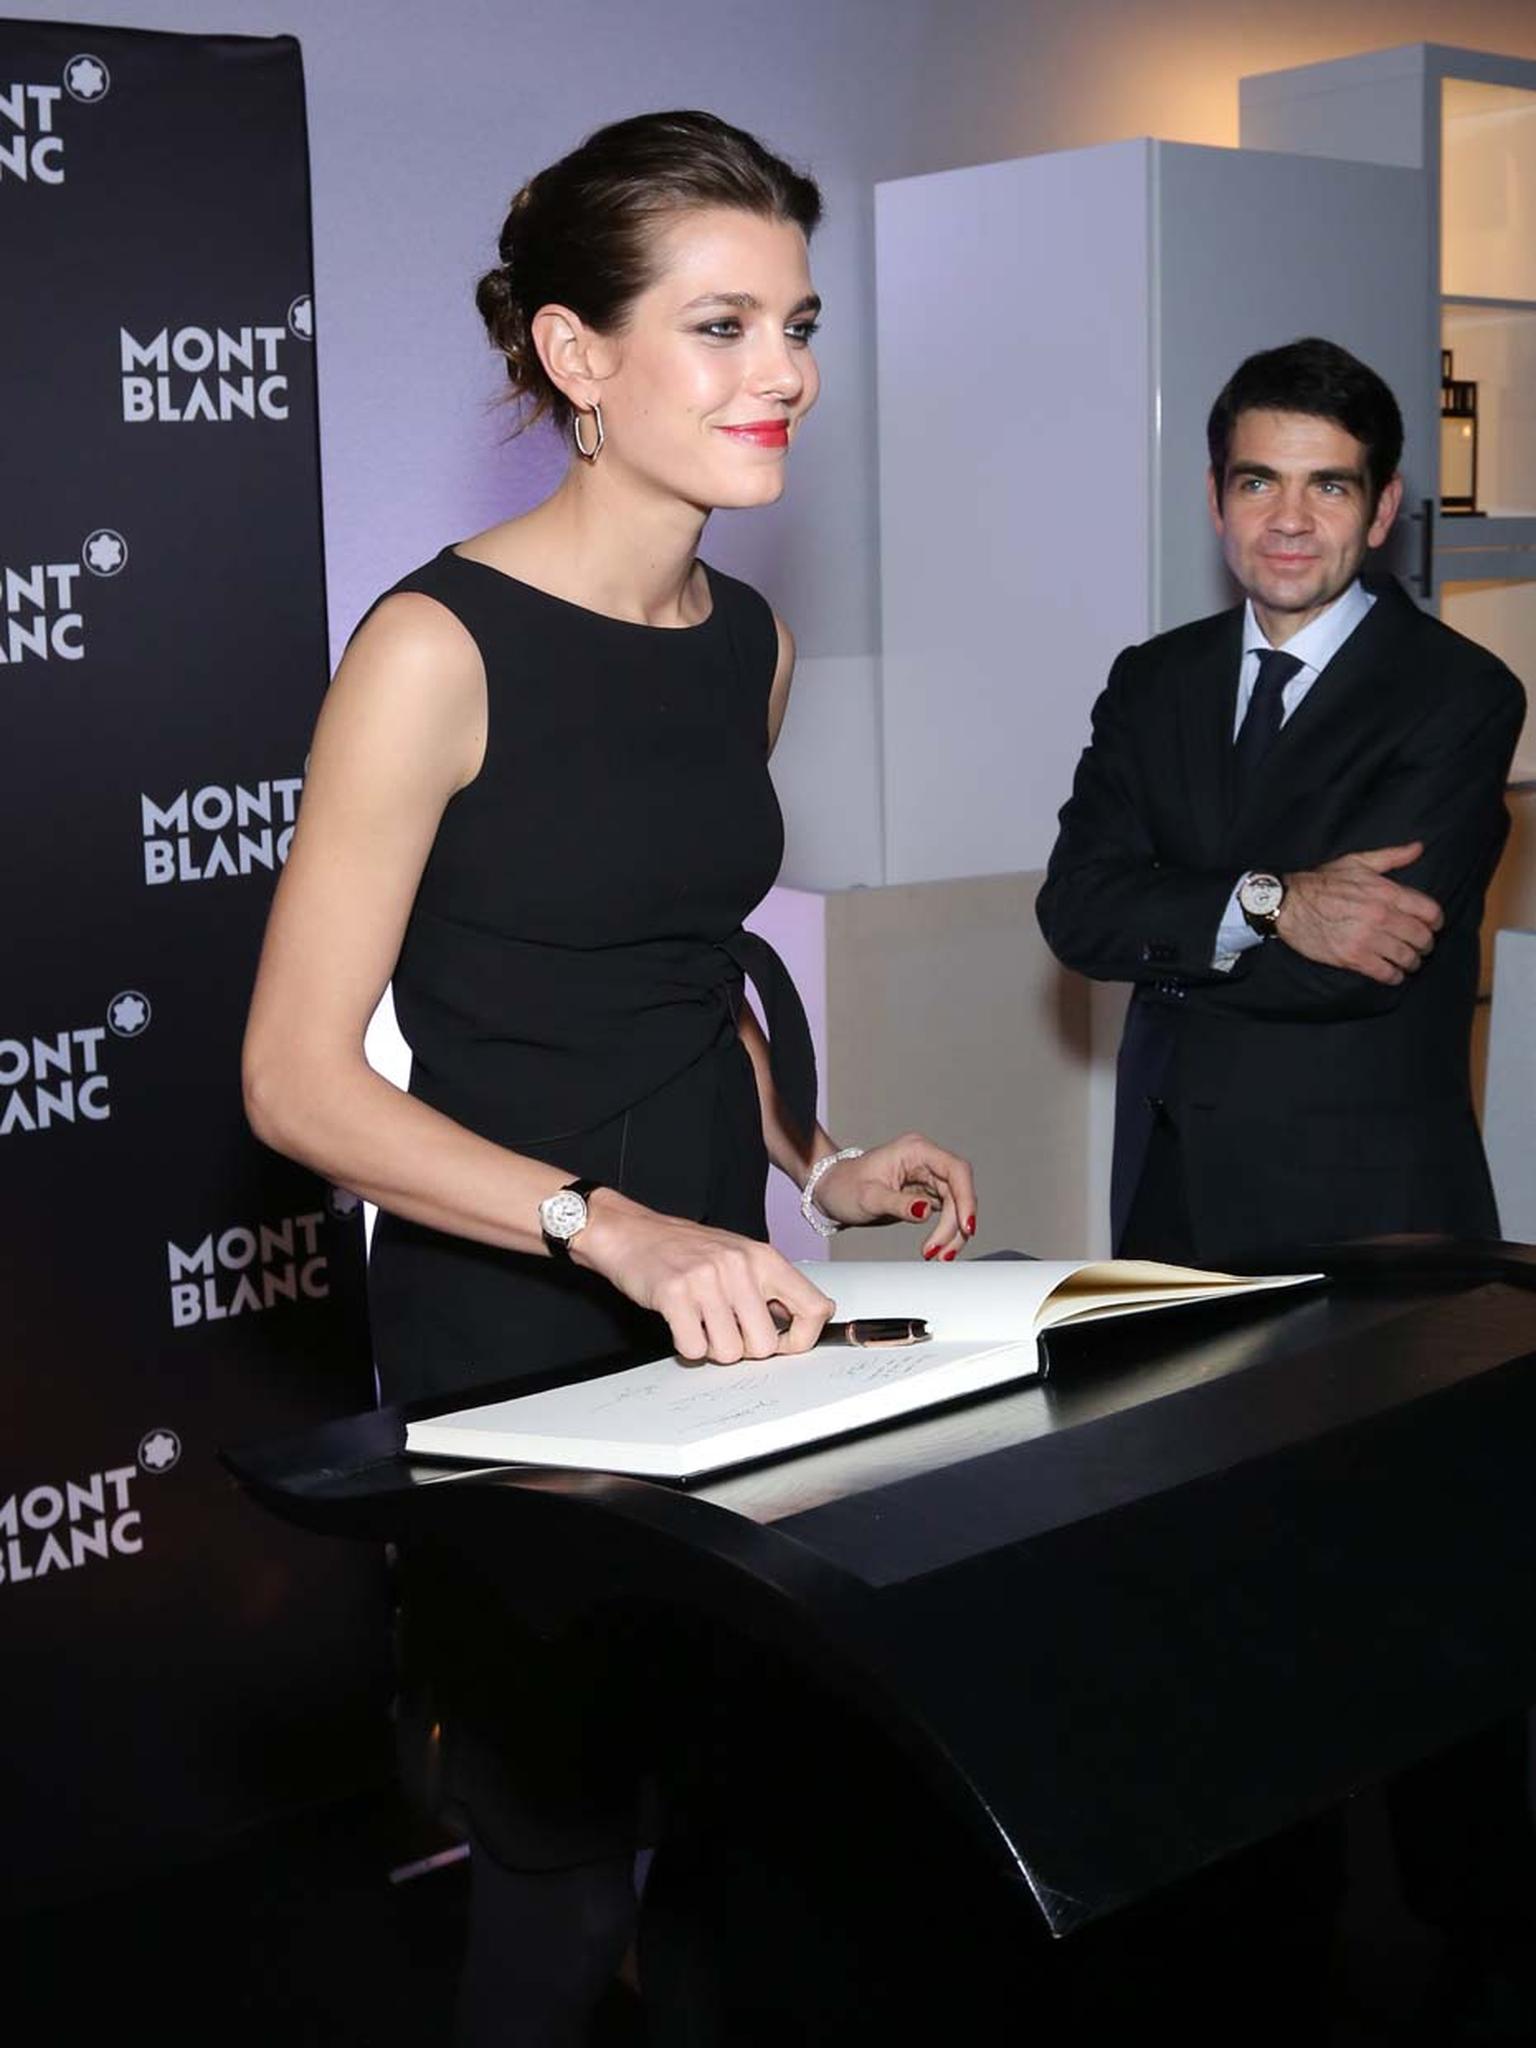 Charlotte Casiraghi is Montblanc's new global brand ambassador for timepieces, jewellery and writing instruments. The equestrian champion, writer and producer will appear in Montblanc’s forthcoming advertising campaign.